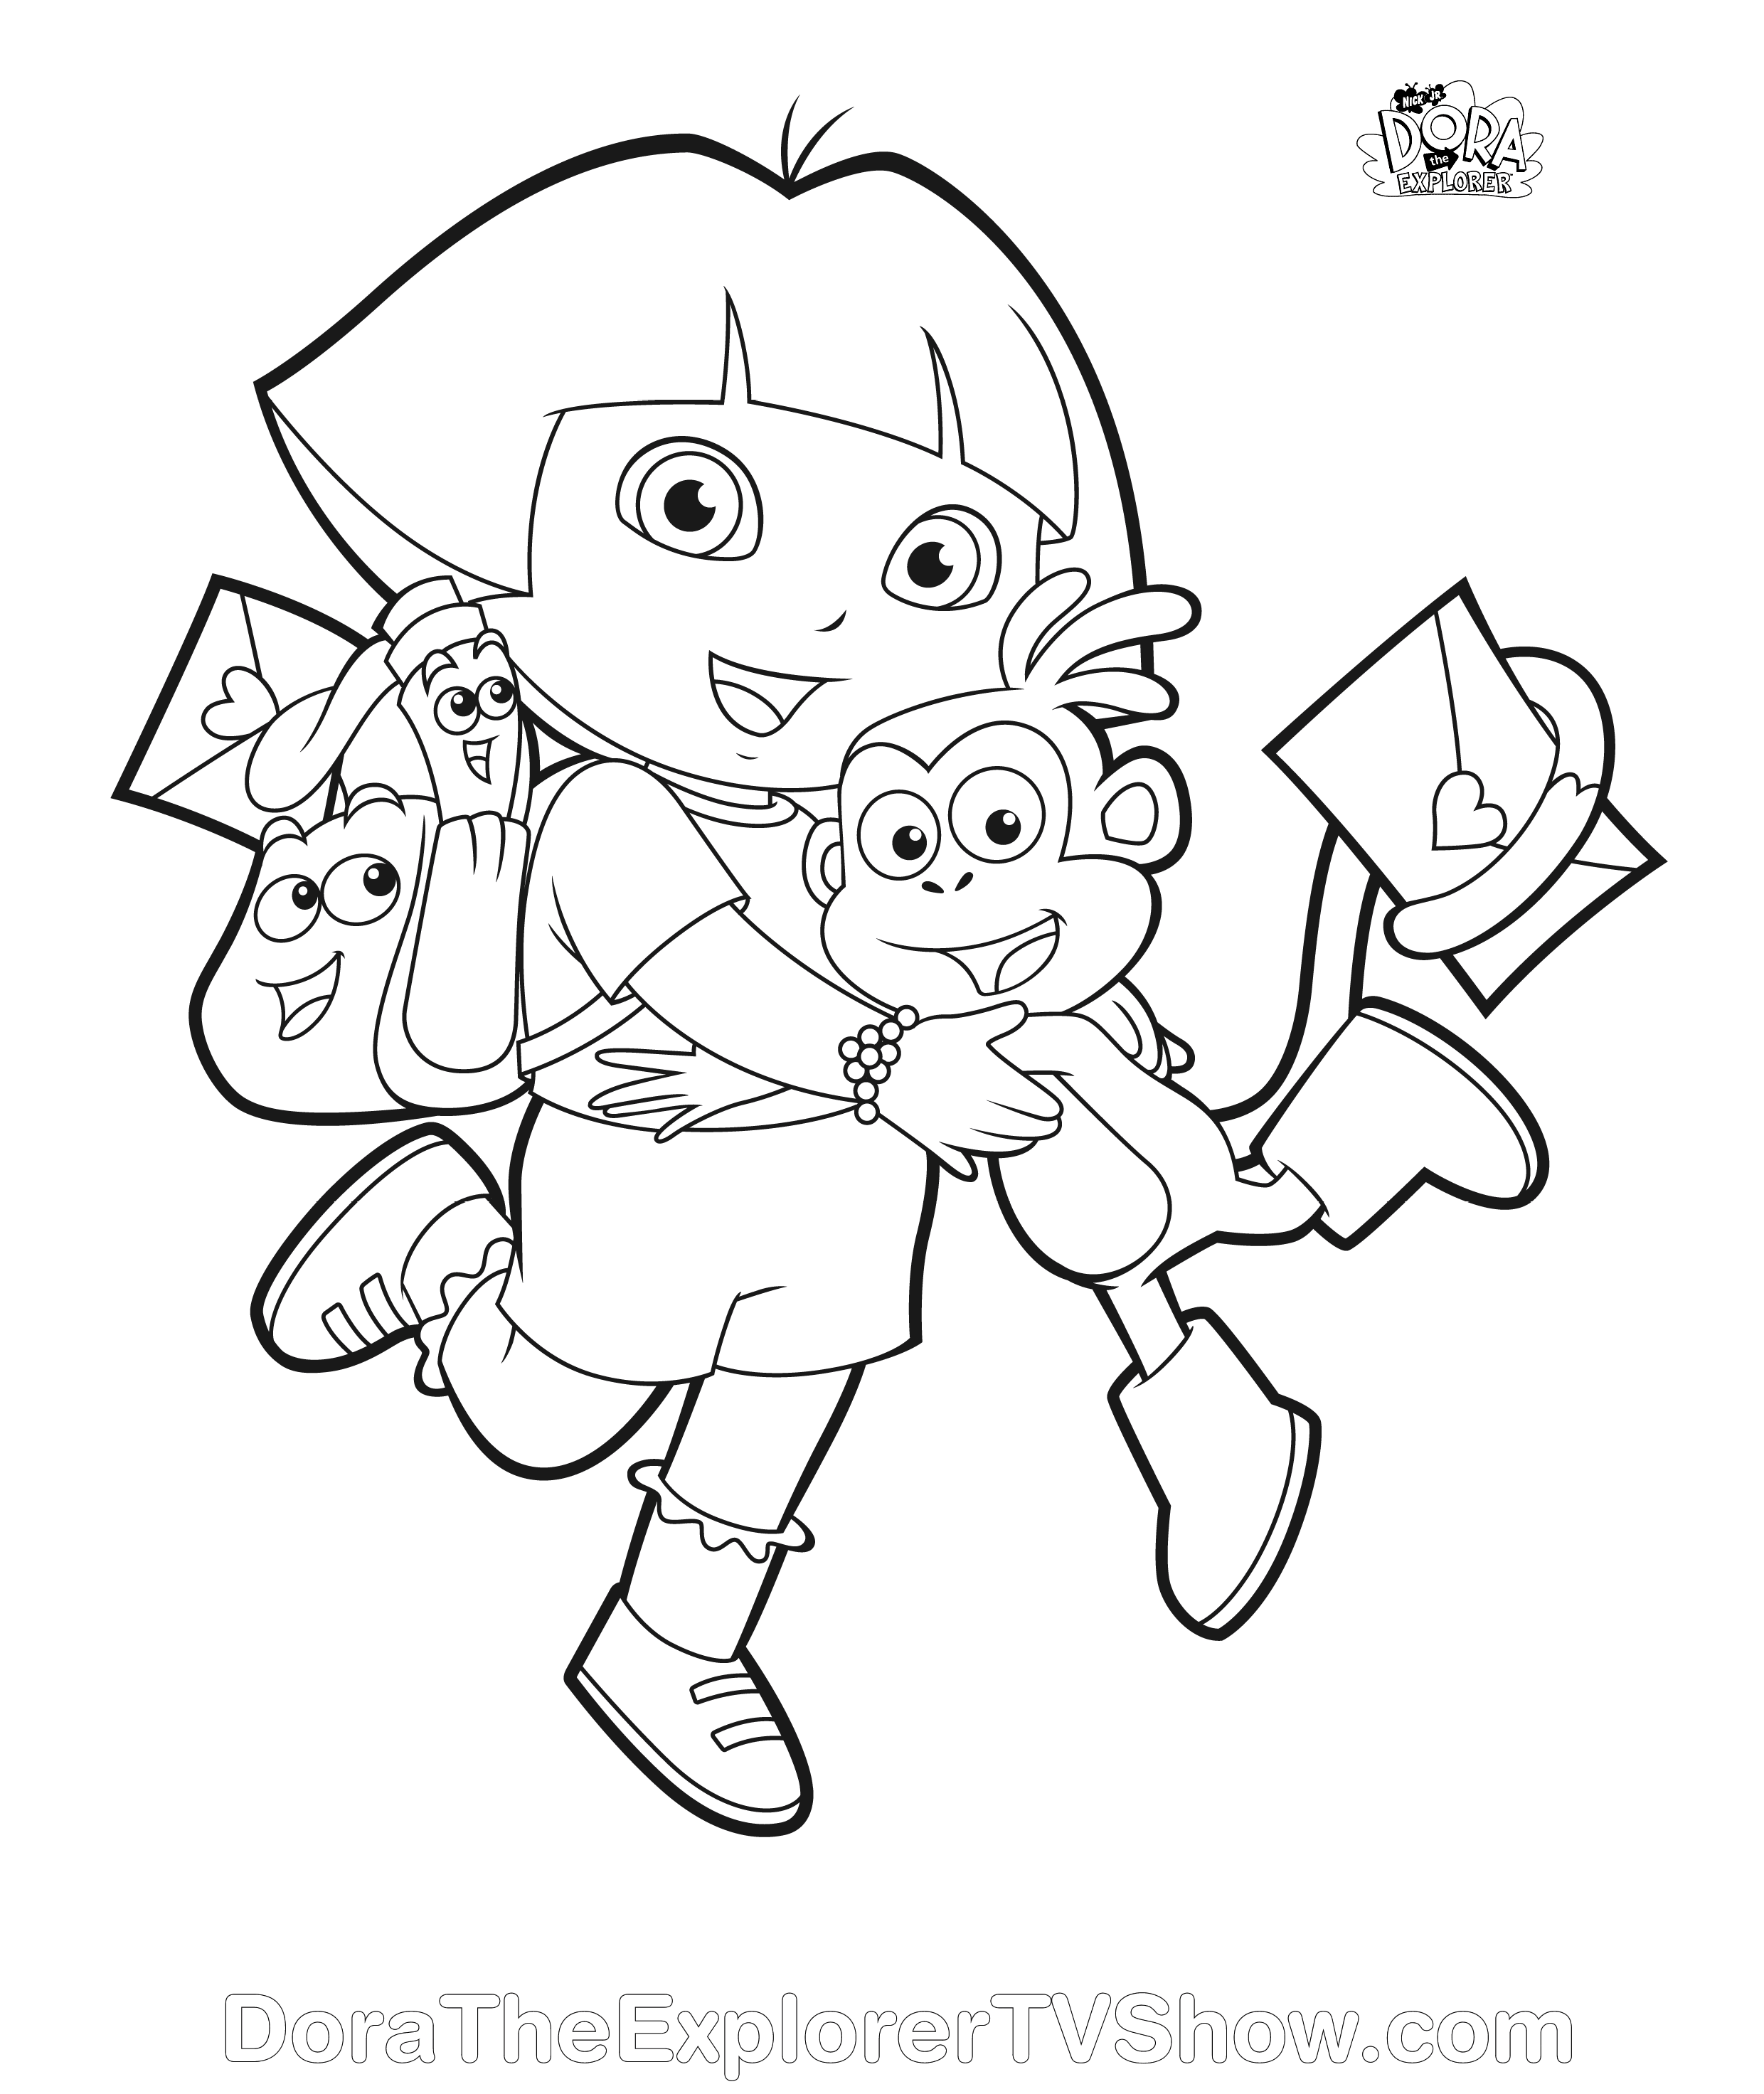 Coloring pages for kids, Dora the explorer and Coloring pages on ...